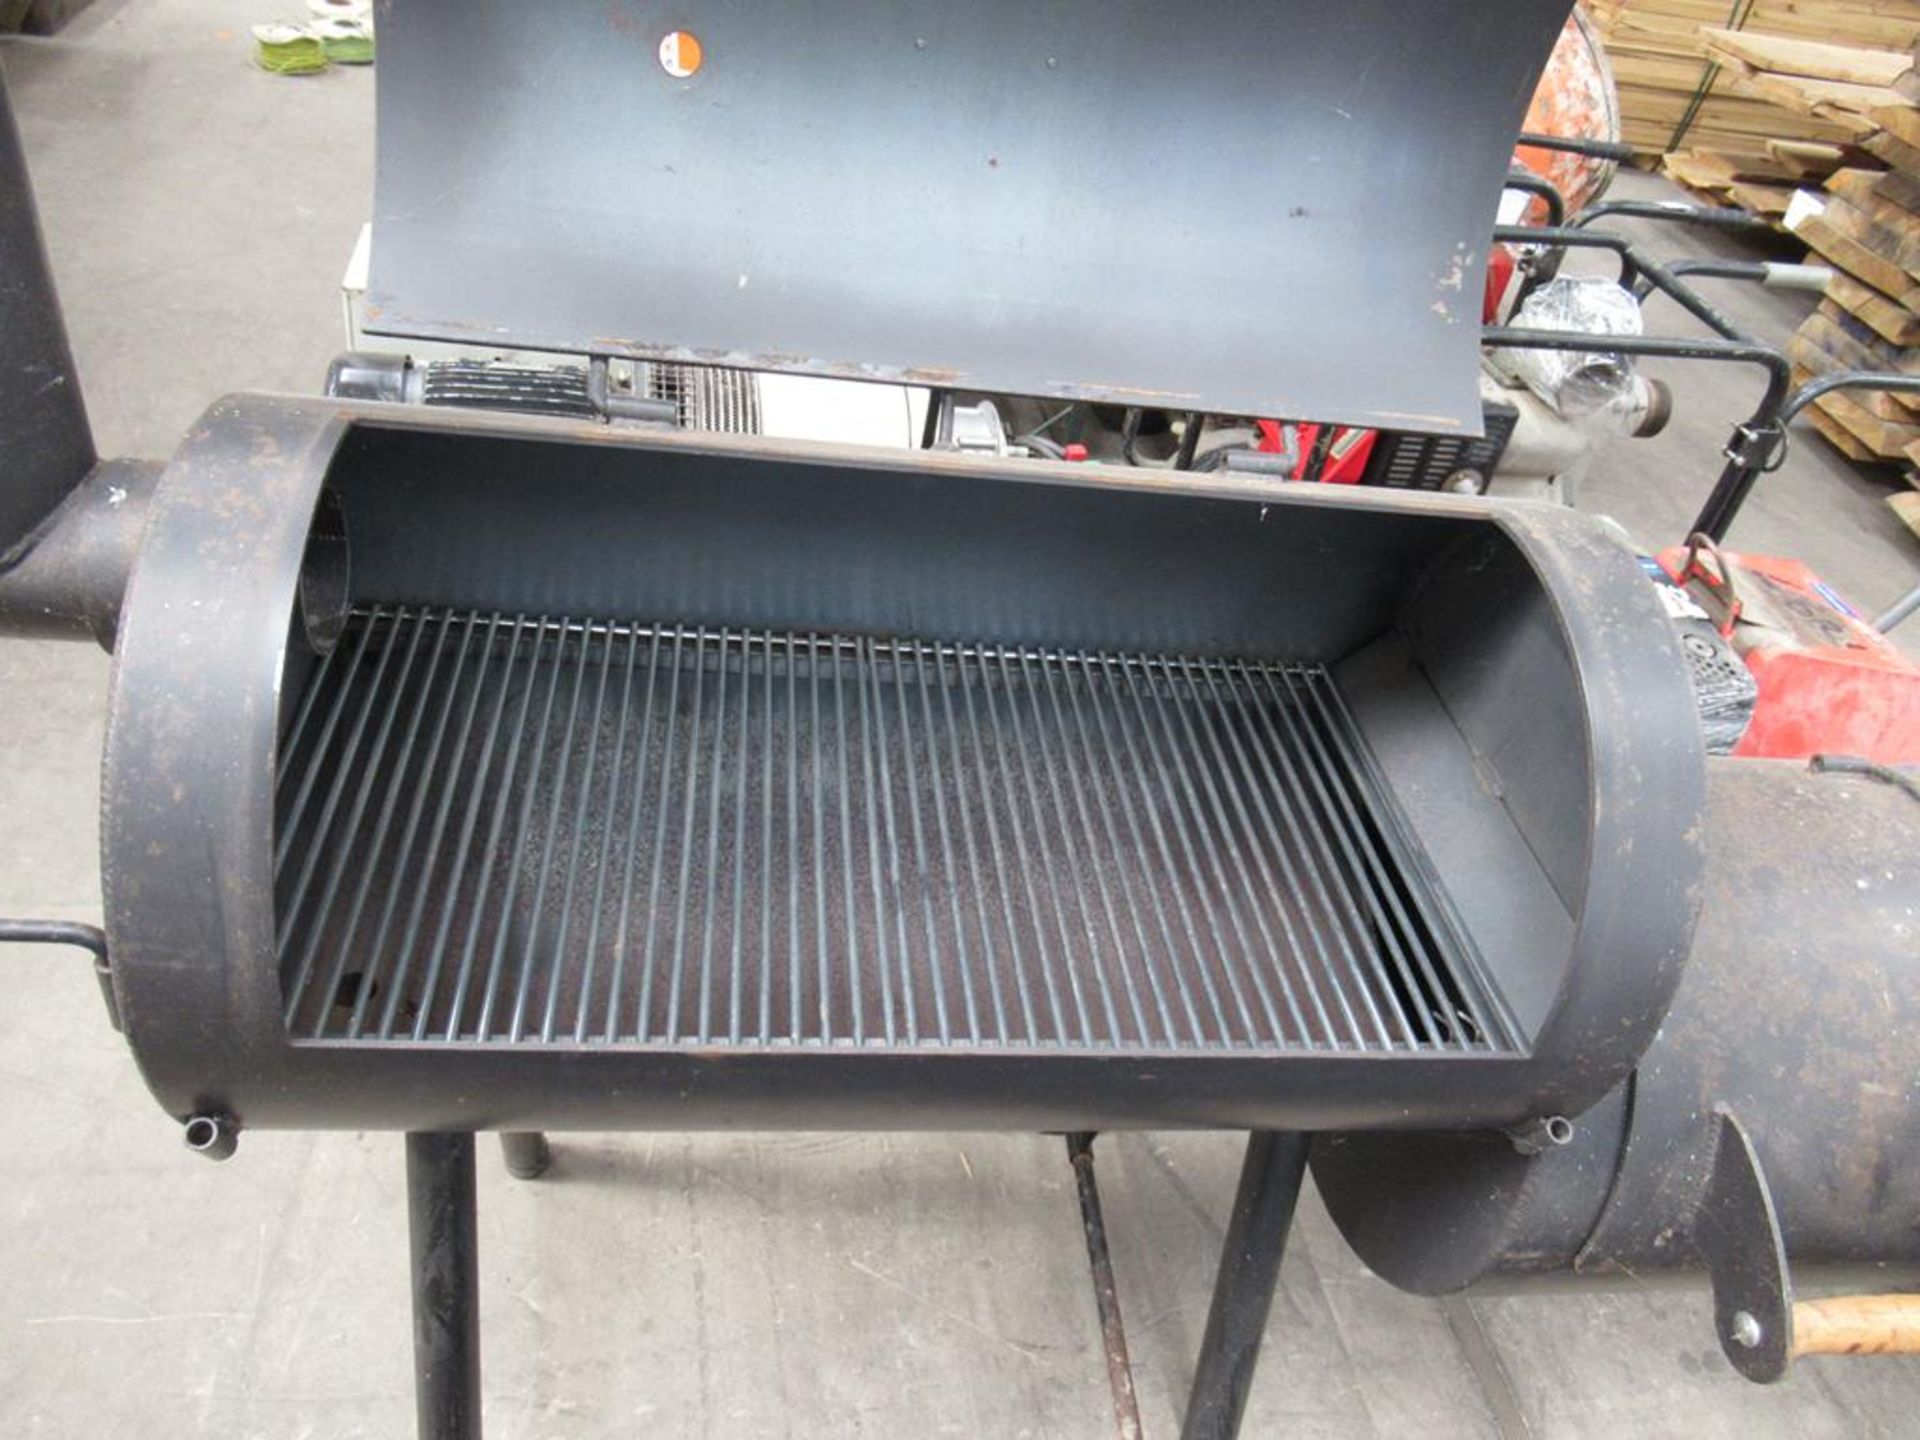 Cactus Jack Heavy Duty Barbeque with Smoker - Image 2 of 4